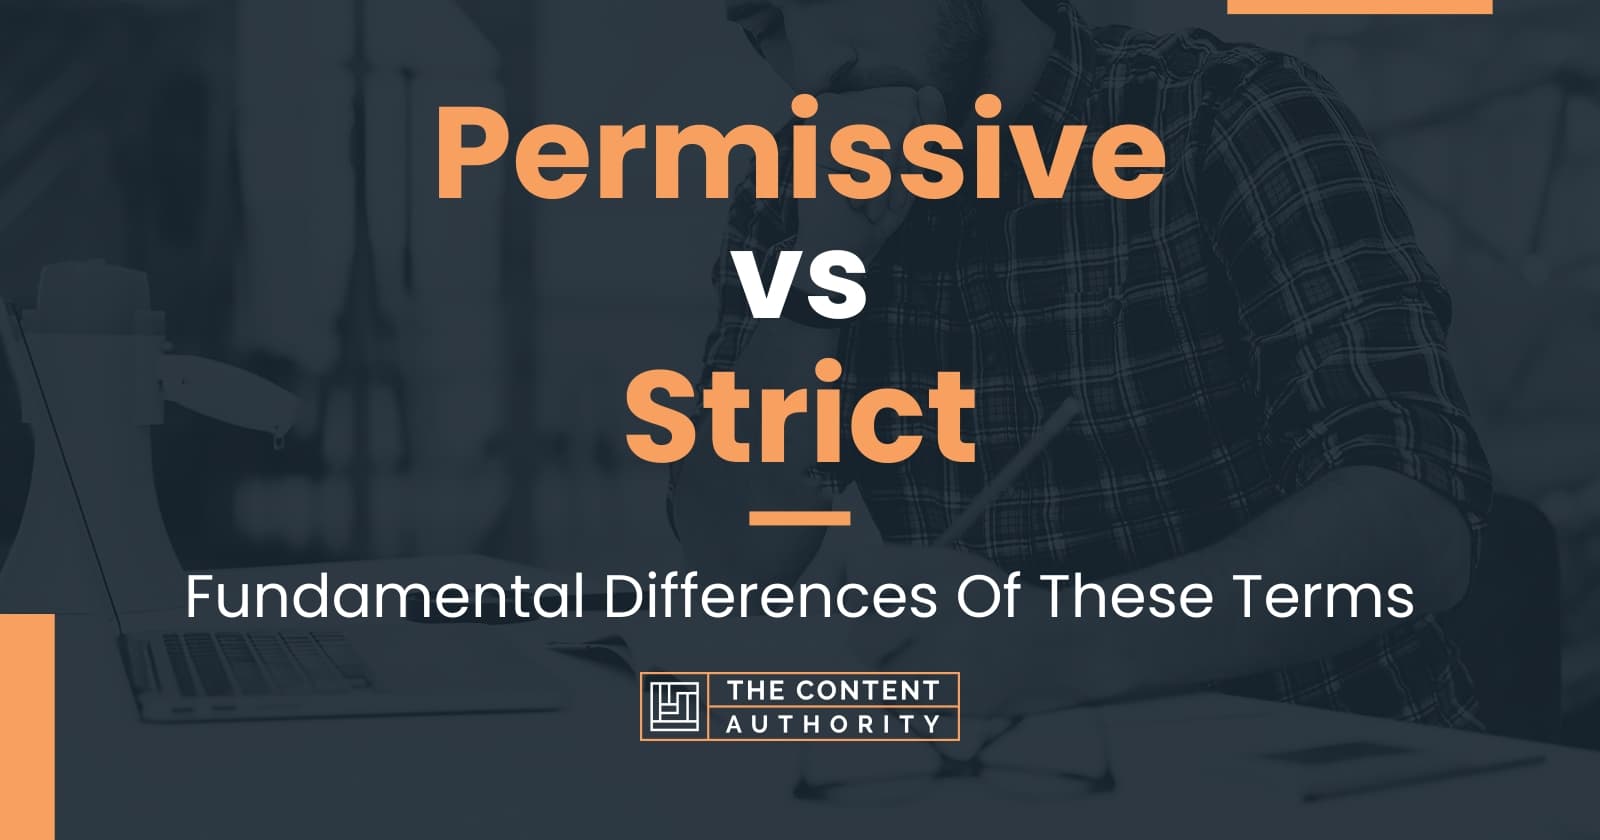 Permissive Vs Strict Fundamental Differences Of These Terms